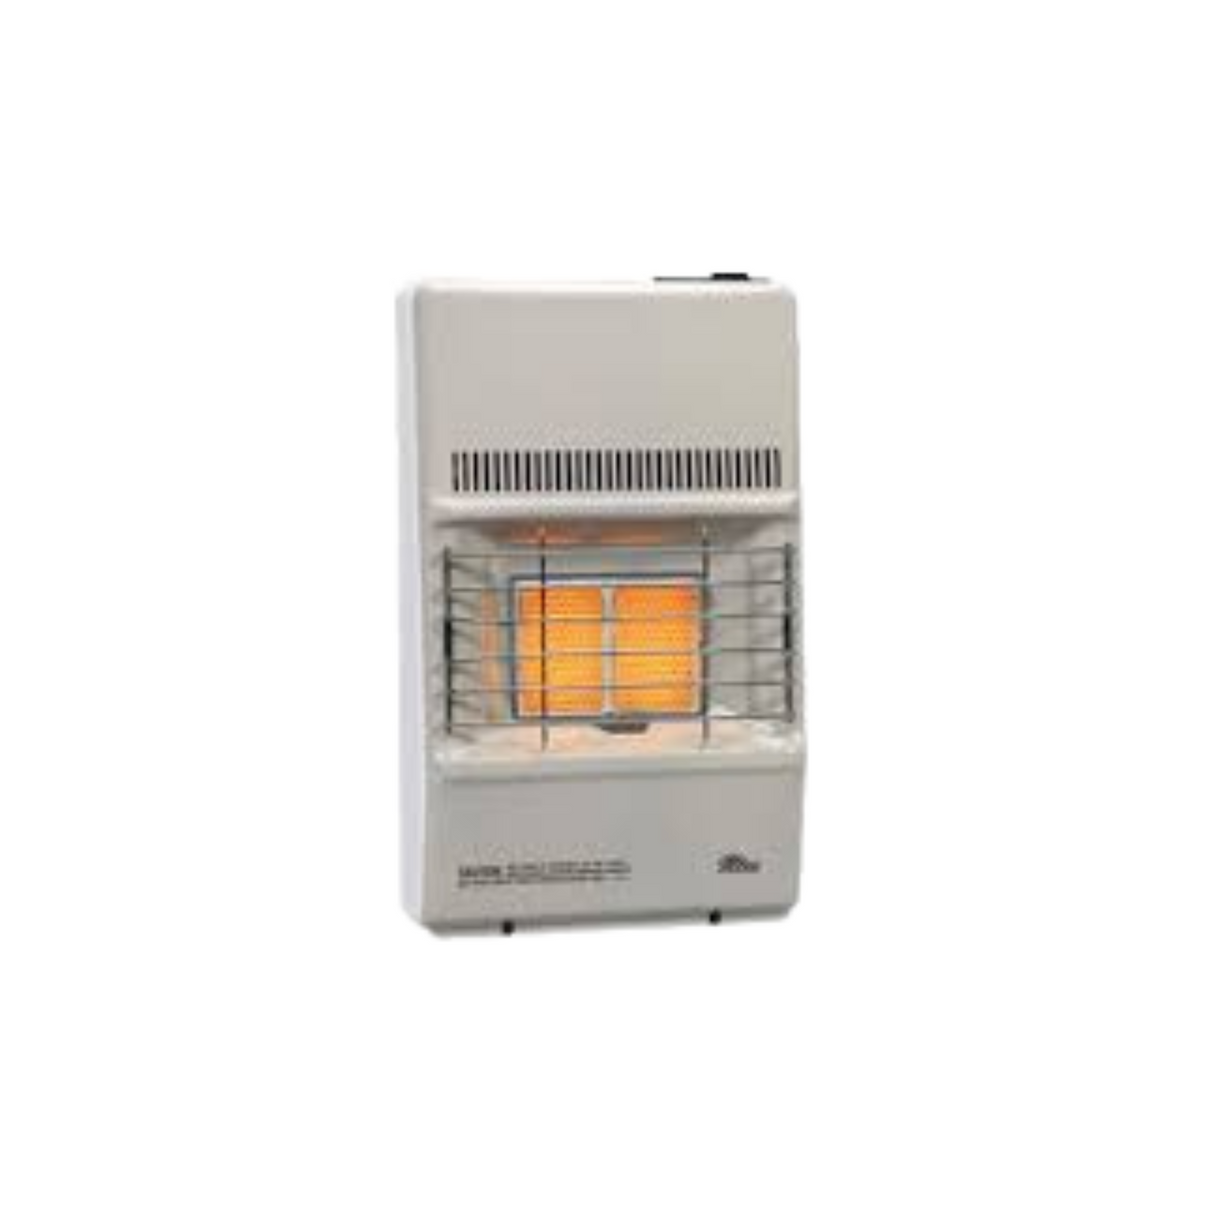 Sunstar Heating Products SC10M-LP 8500 BTU Vent Free Infrared/Radiant Manual Heater, LP Gas